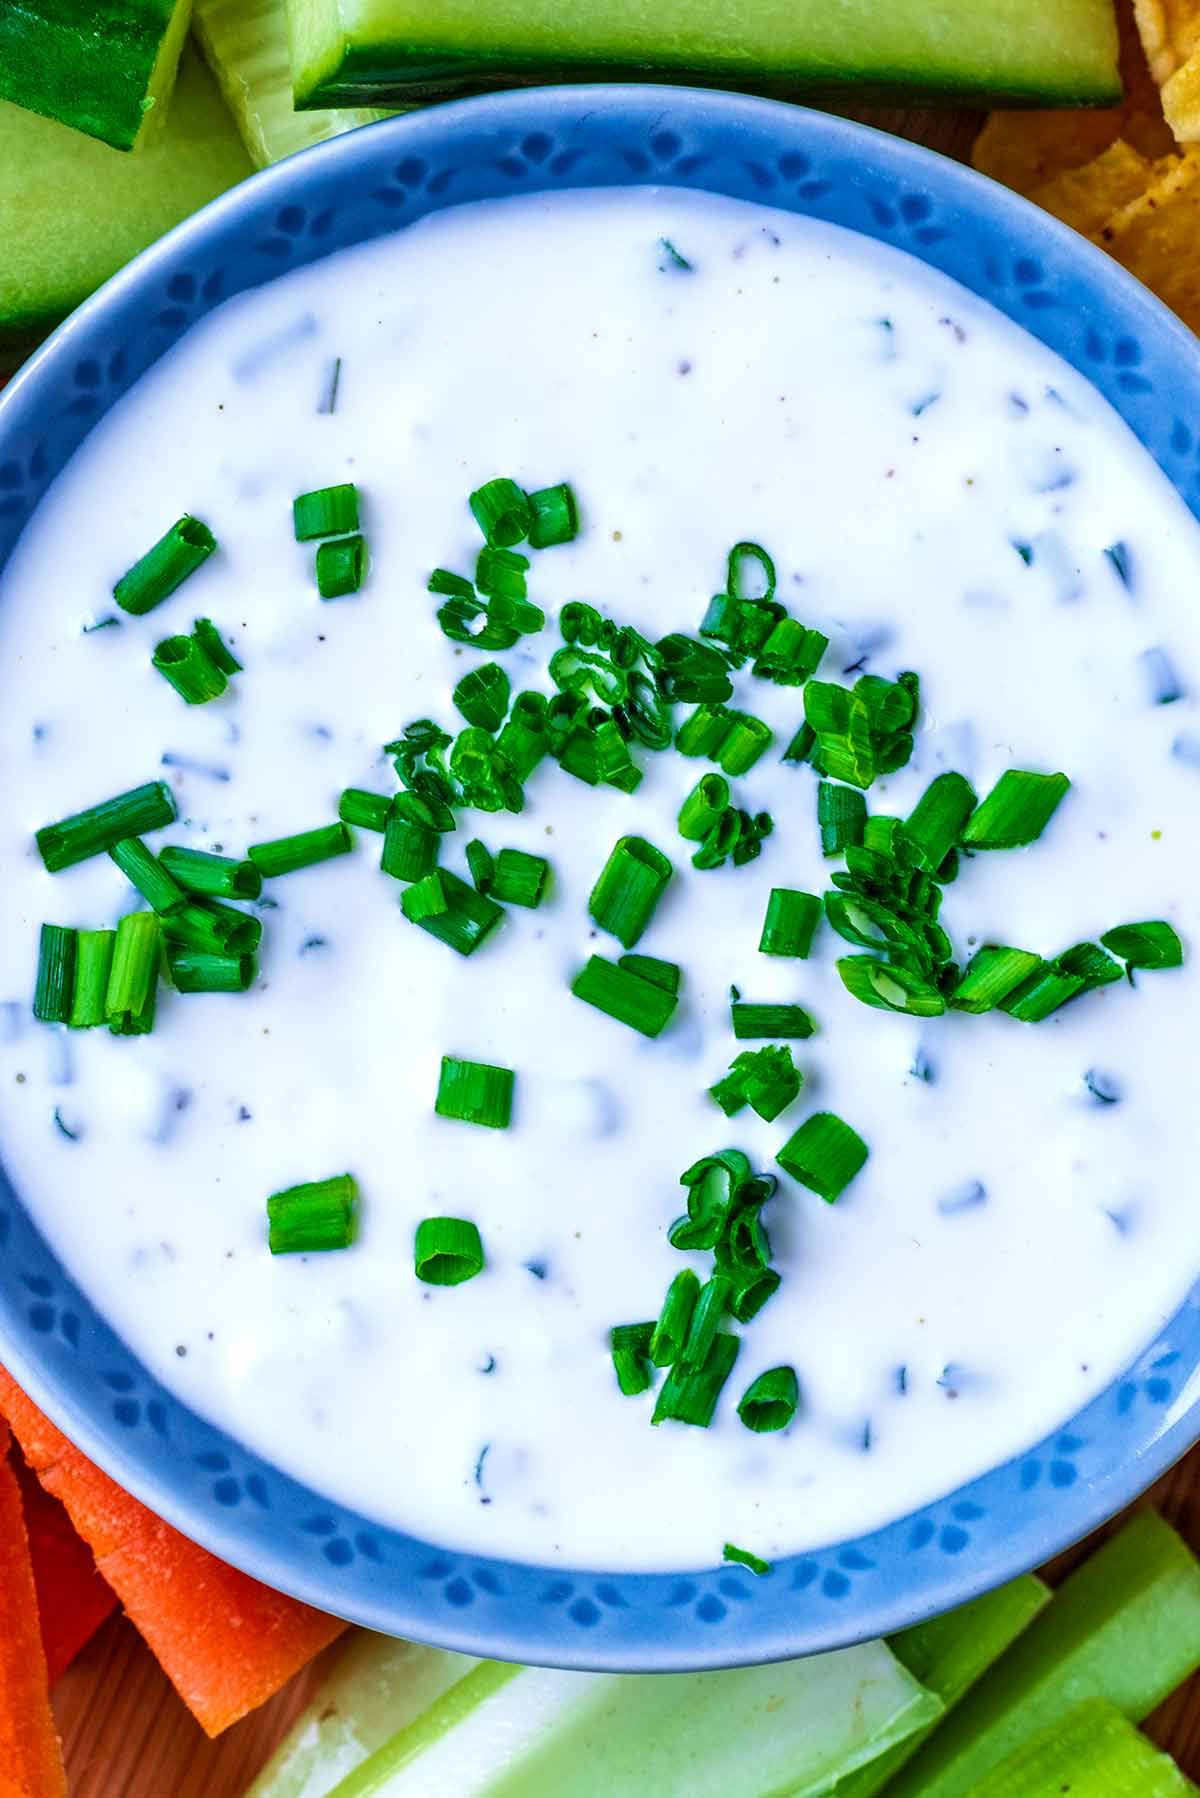 Chopped chives on top of a sour cream dip.